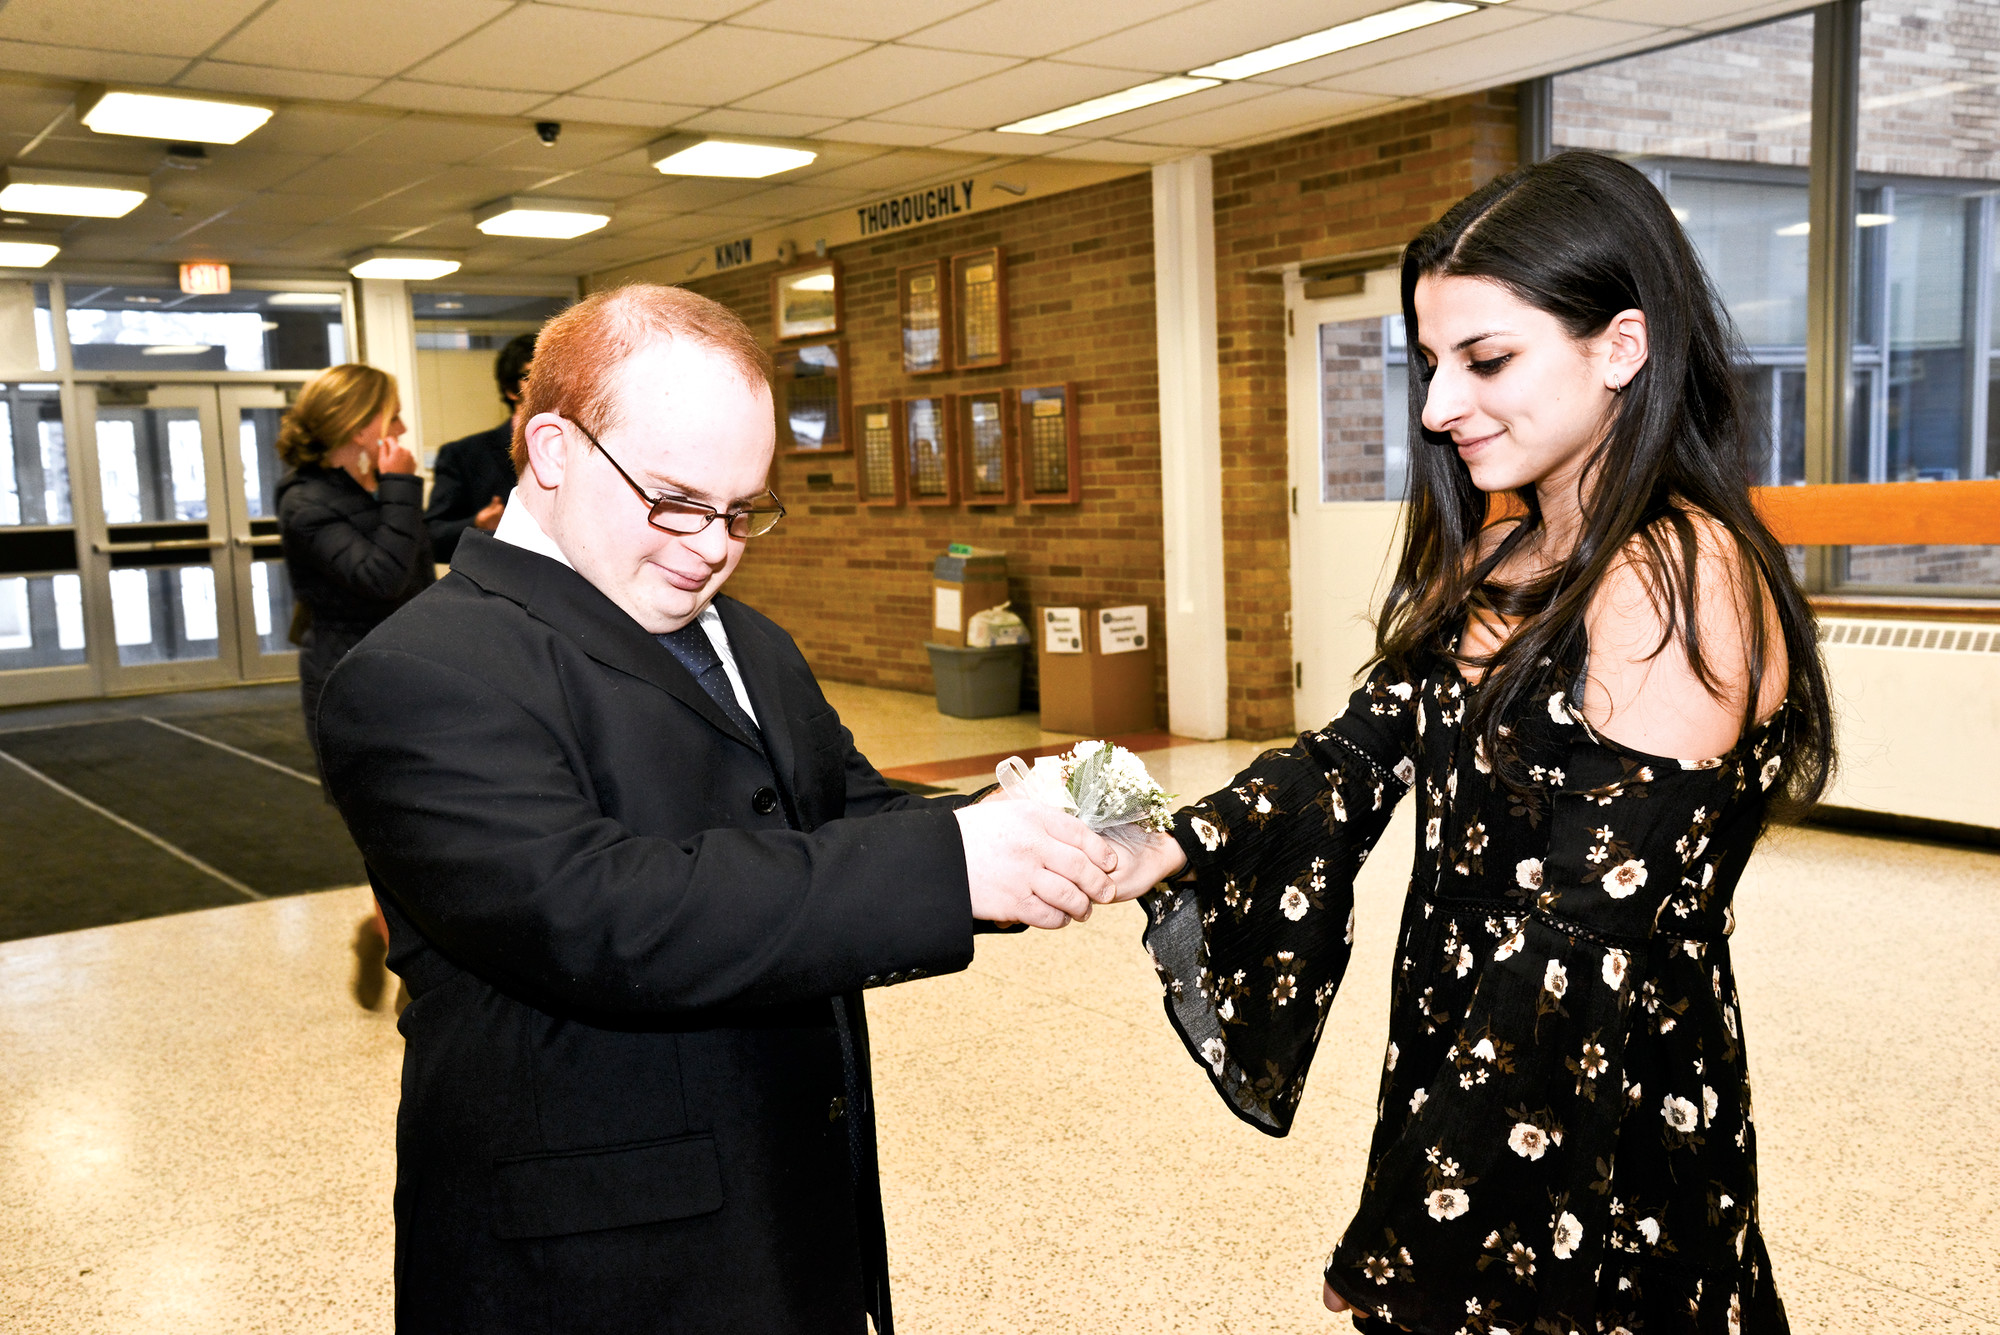 Kevin Costello greeted his date Kayla Cavlae with a corsage.